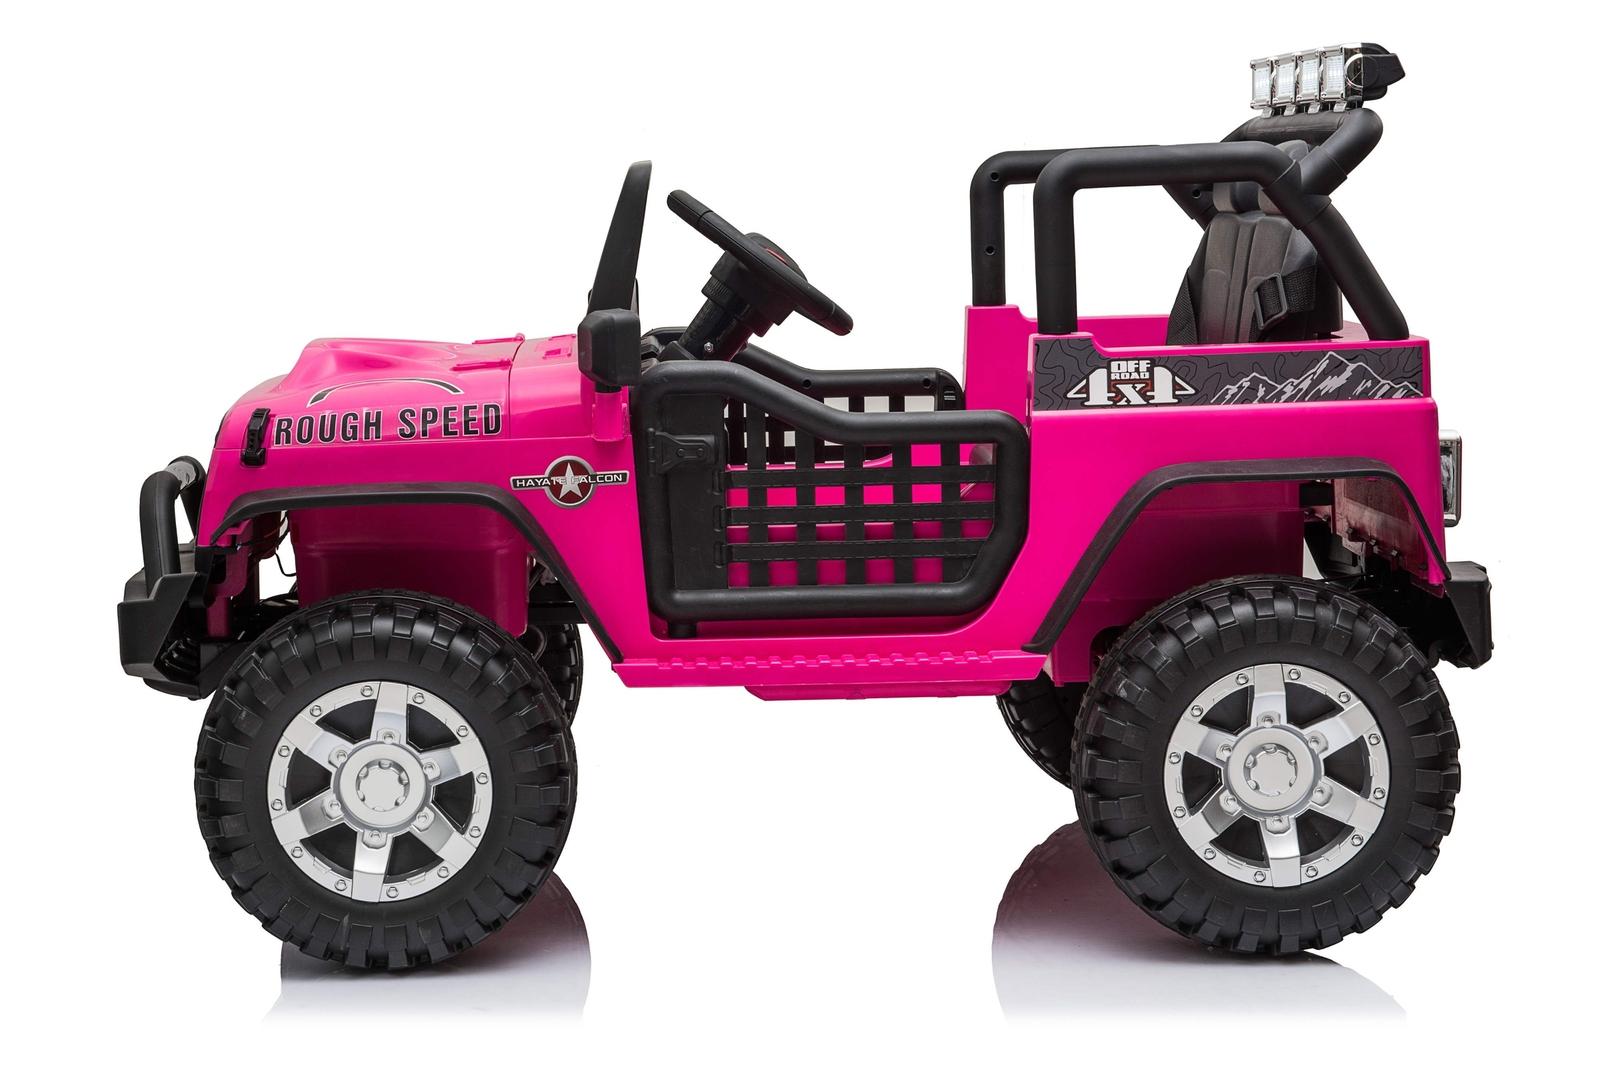 Childrens Ride On/Off Road Jeep VehicleChildrens Ride On/Off Road Jeep VehicleChildrens Ride On/Off Road Jeep VehicleChildrens Ride On/Off Road Jeep VehicleChildrens Ride On/Off Road Jeep Vehicle